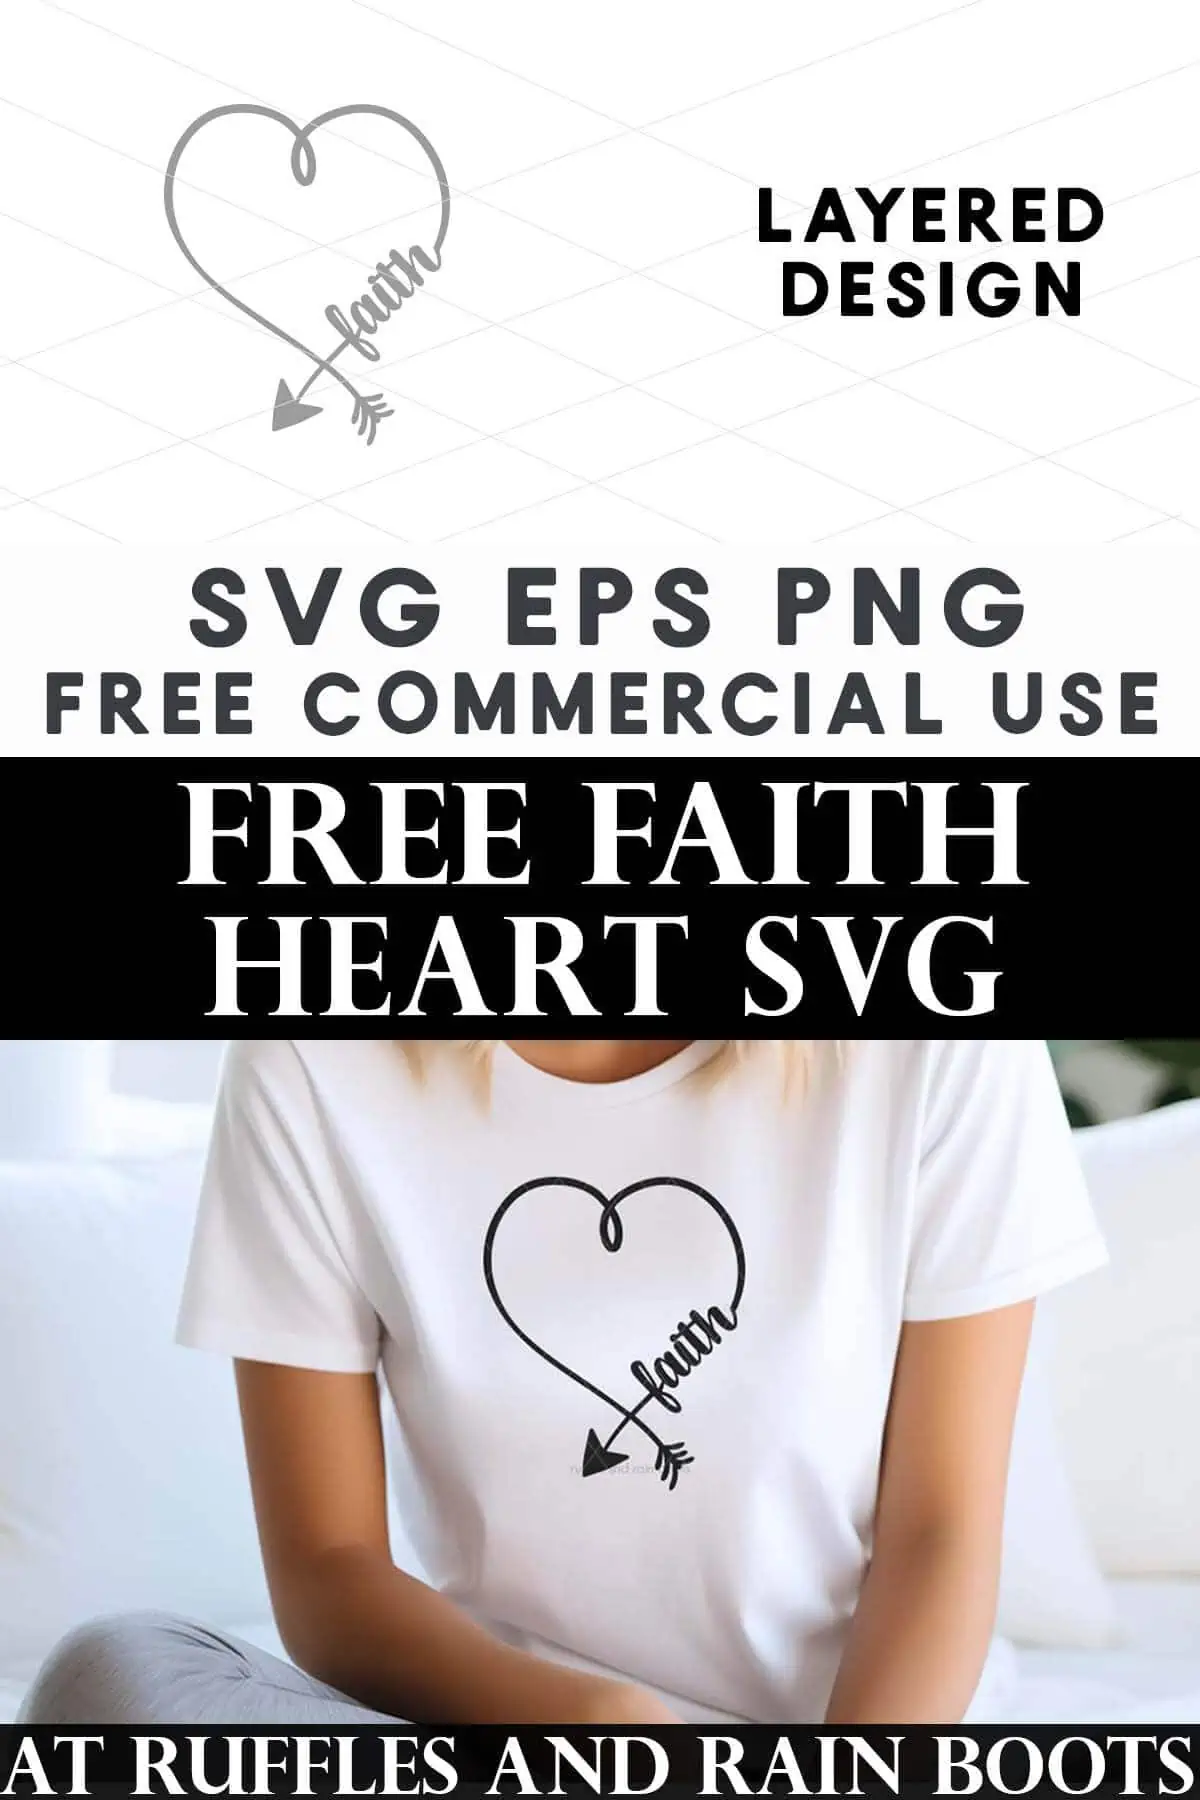 Split vertical image of a free faith SVG with heart and arrow design on woman wearing a white t-shirt sitting on a white couch.